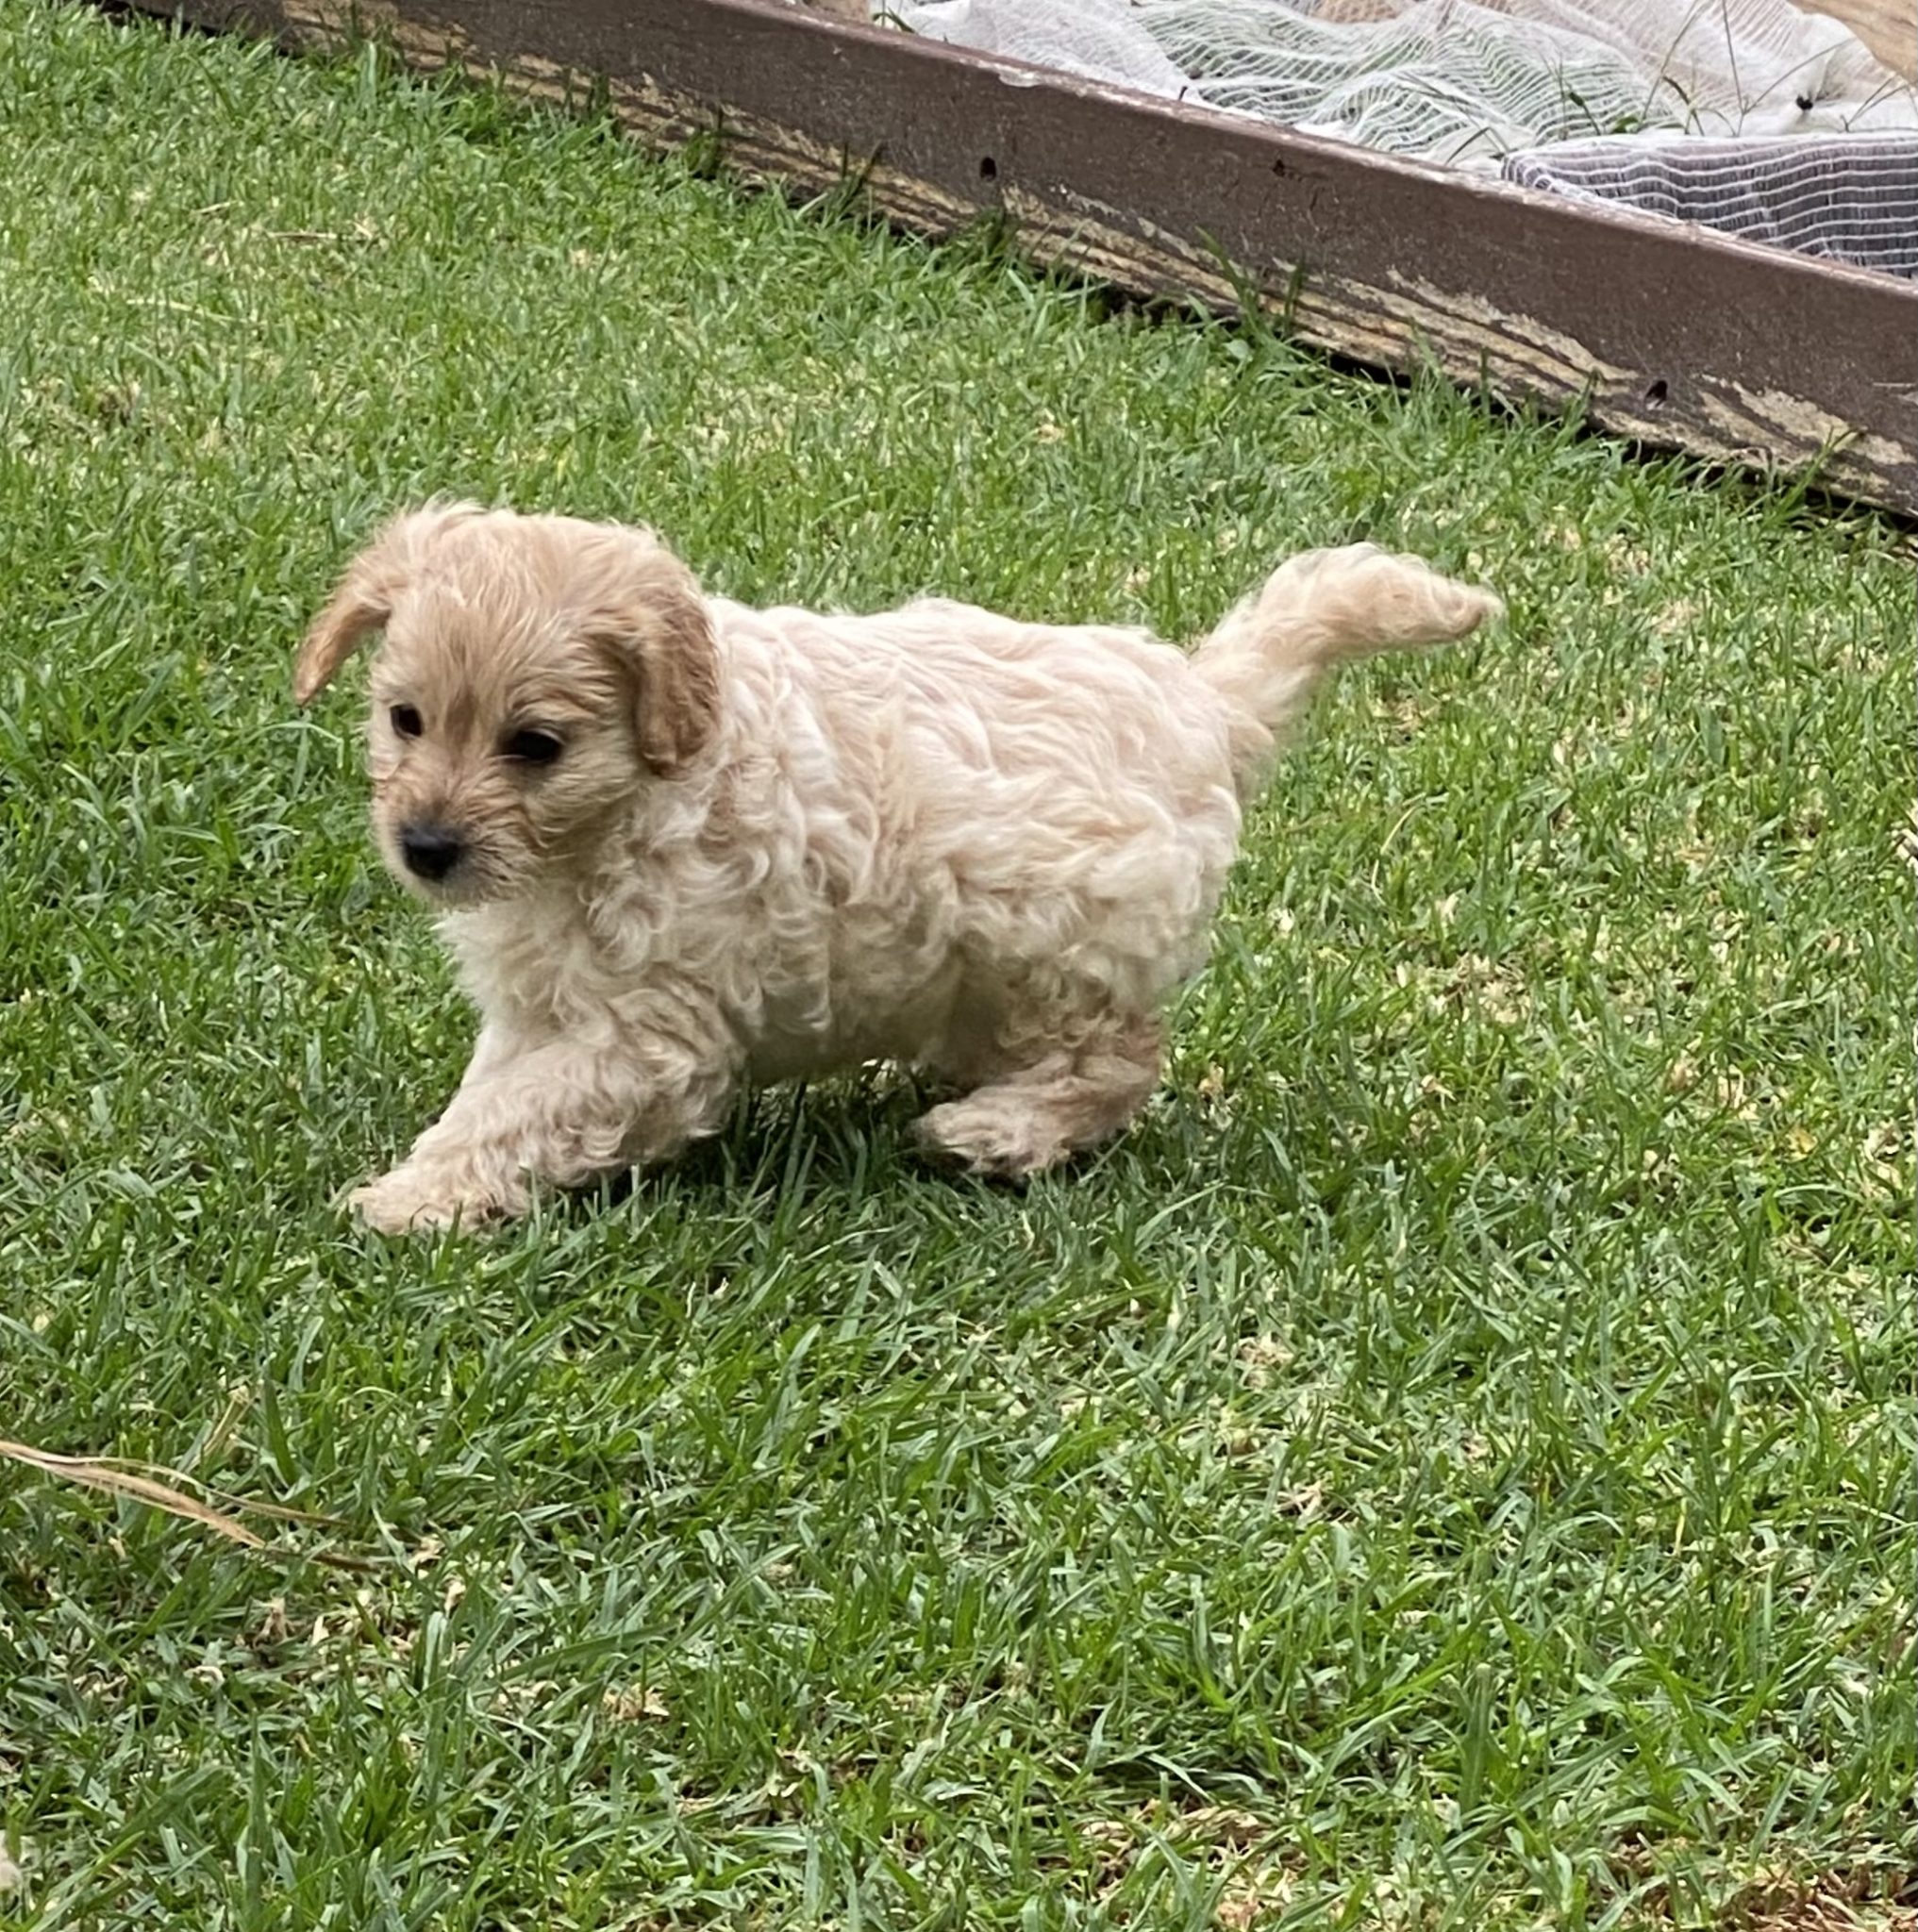 Spoodle F2 Puppies for Sale